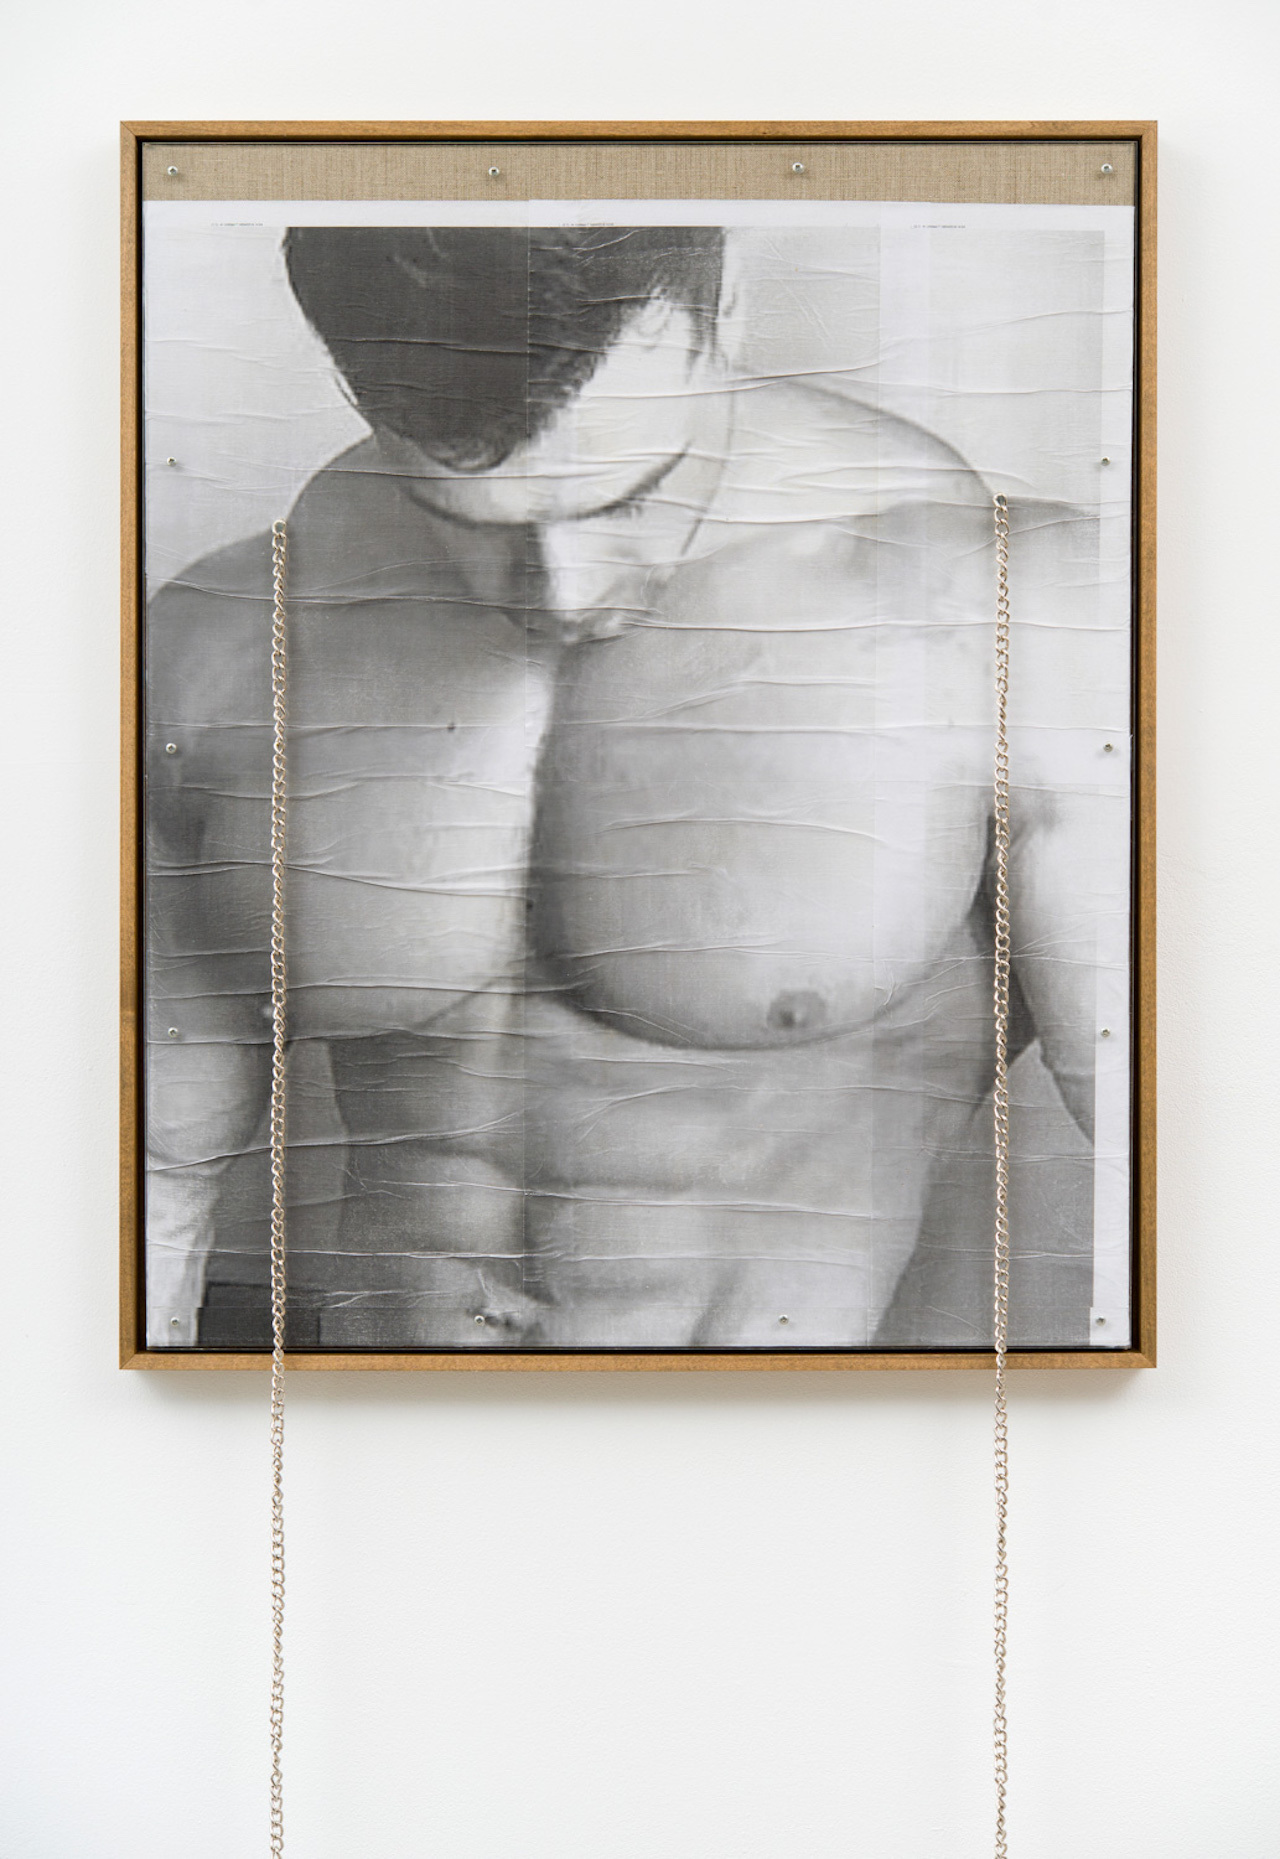 Philipp Timischl, Fear is freedom. Subjugation is liberation. Contradiction is truth. I never met a dollar i didn‘t like, bro. There are no words less true then that., 2018, Xerox print, metal chain, embossed dog tag, acrylic glass on linen, framed, 90 x 70 cm, Courtesy Emanuel Layr gallery, Vienna | Callirrhöe, Athens, Photo: Alexandra Masmanidi, 2022